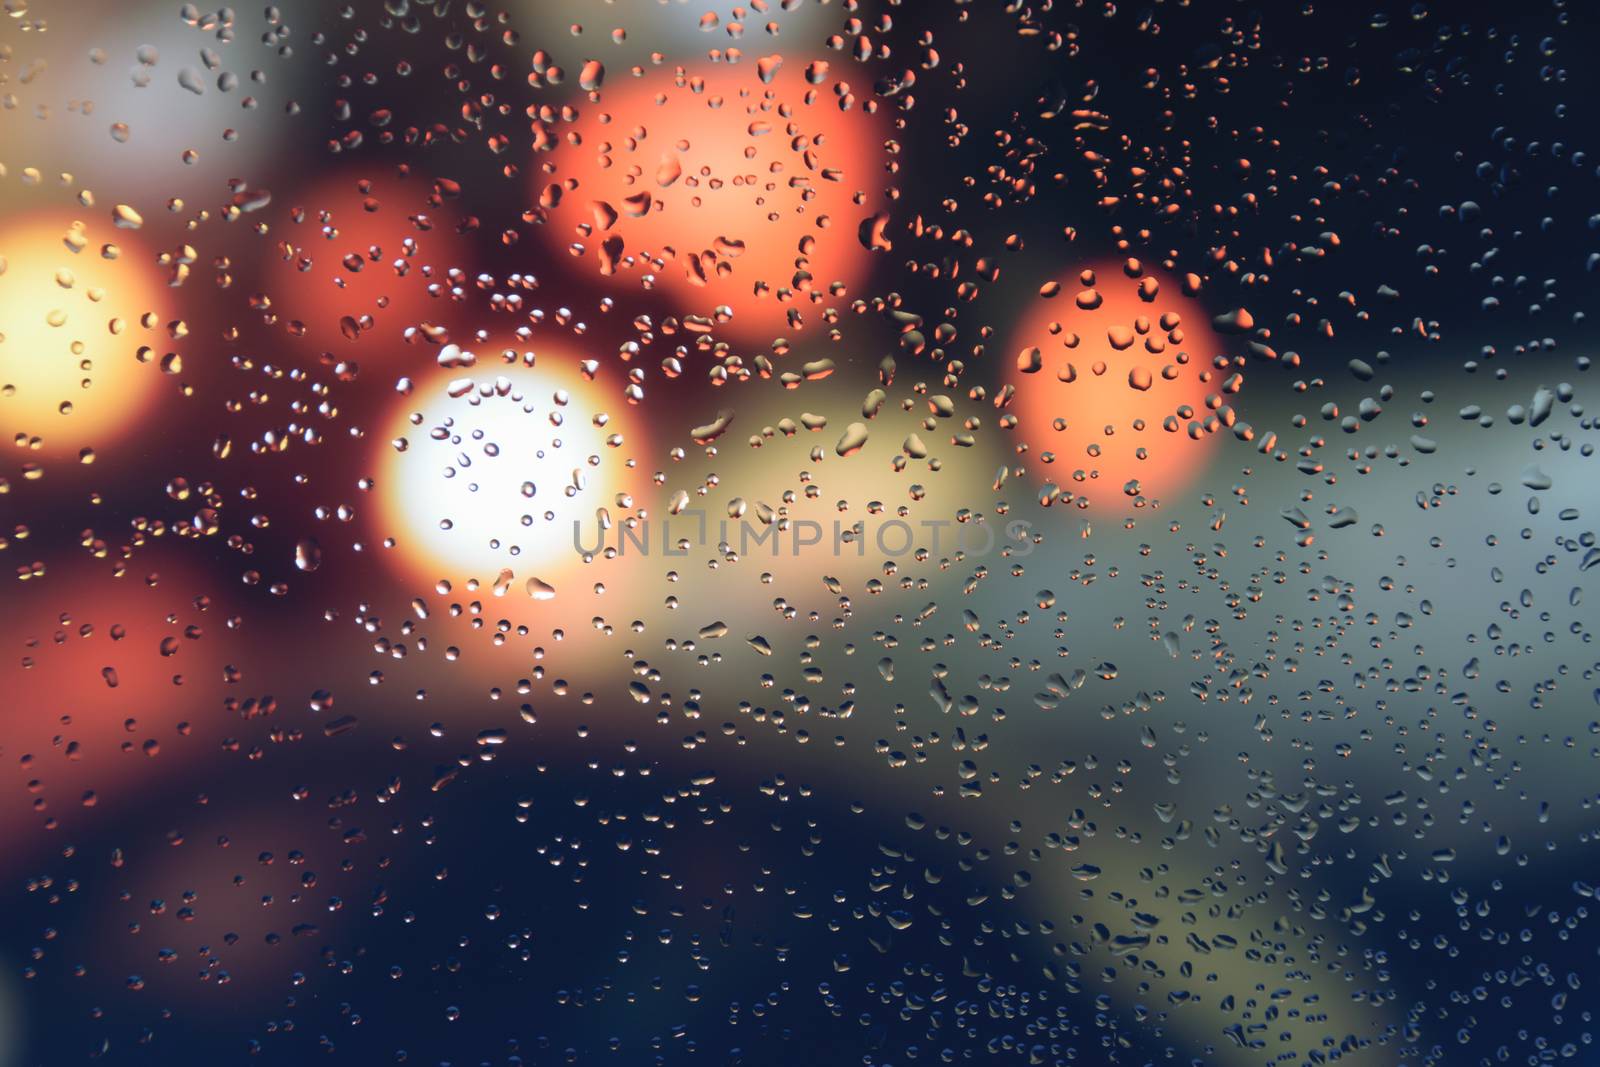 Raindrops on a car glass by wdnet_studio